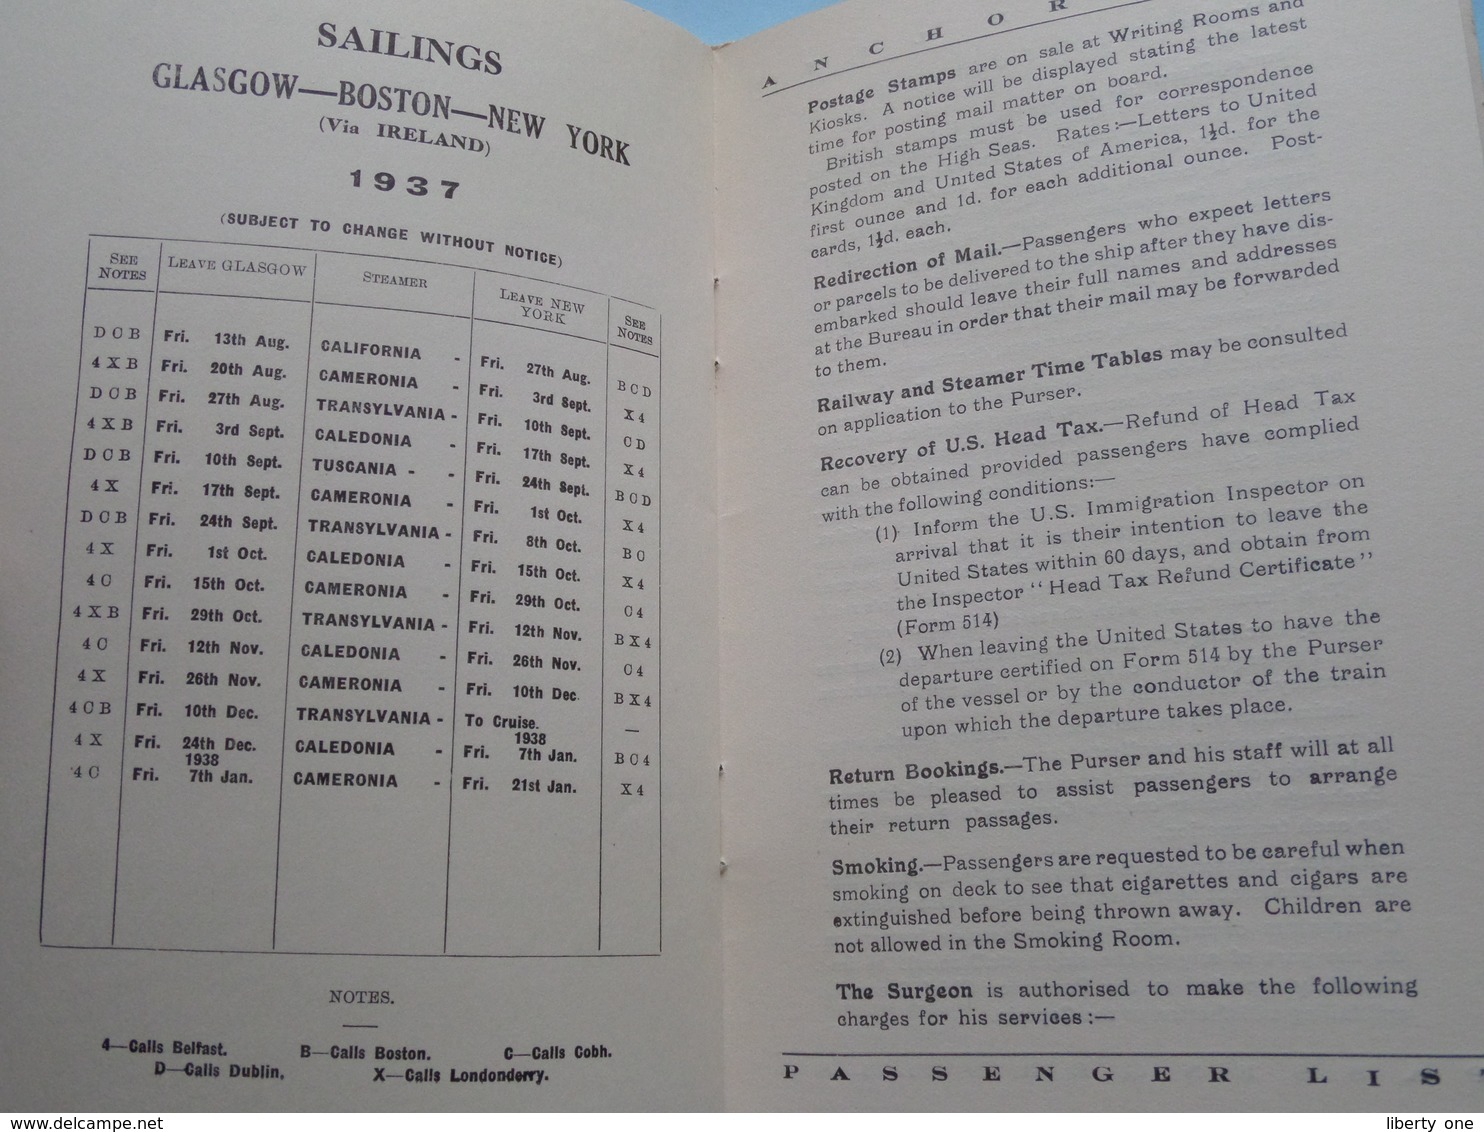 T.S.S. " CALIFORNIA " from Glasgow to NEW YORK 13th August 1937 " ANCHOR LINE " ( List of PASSENGERS ) !